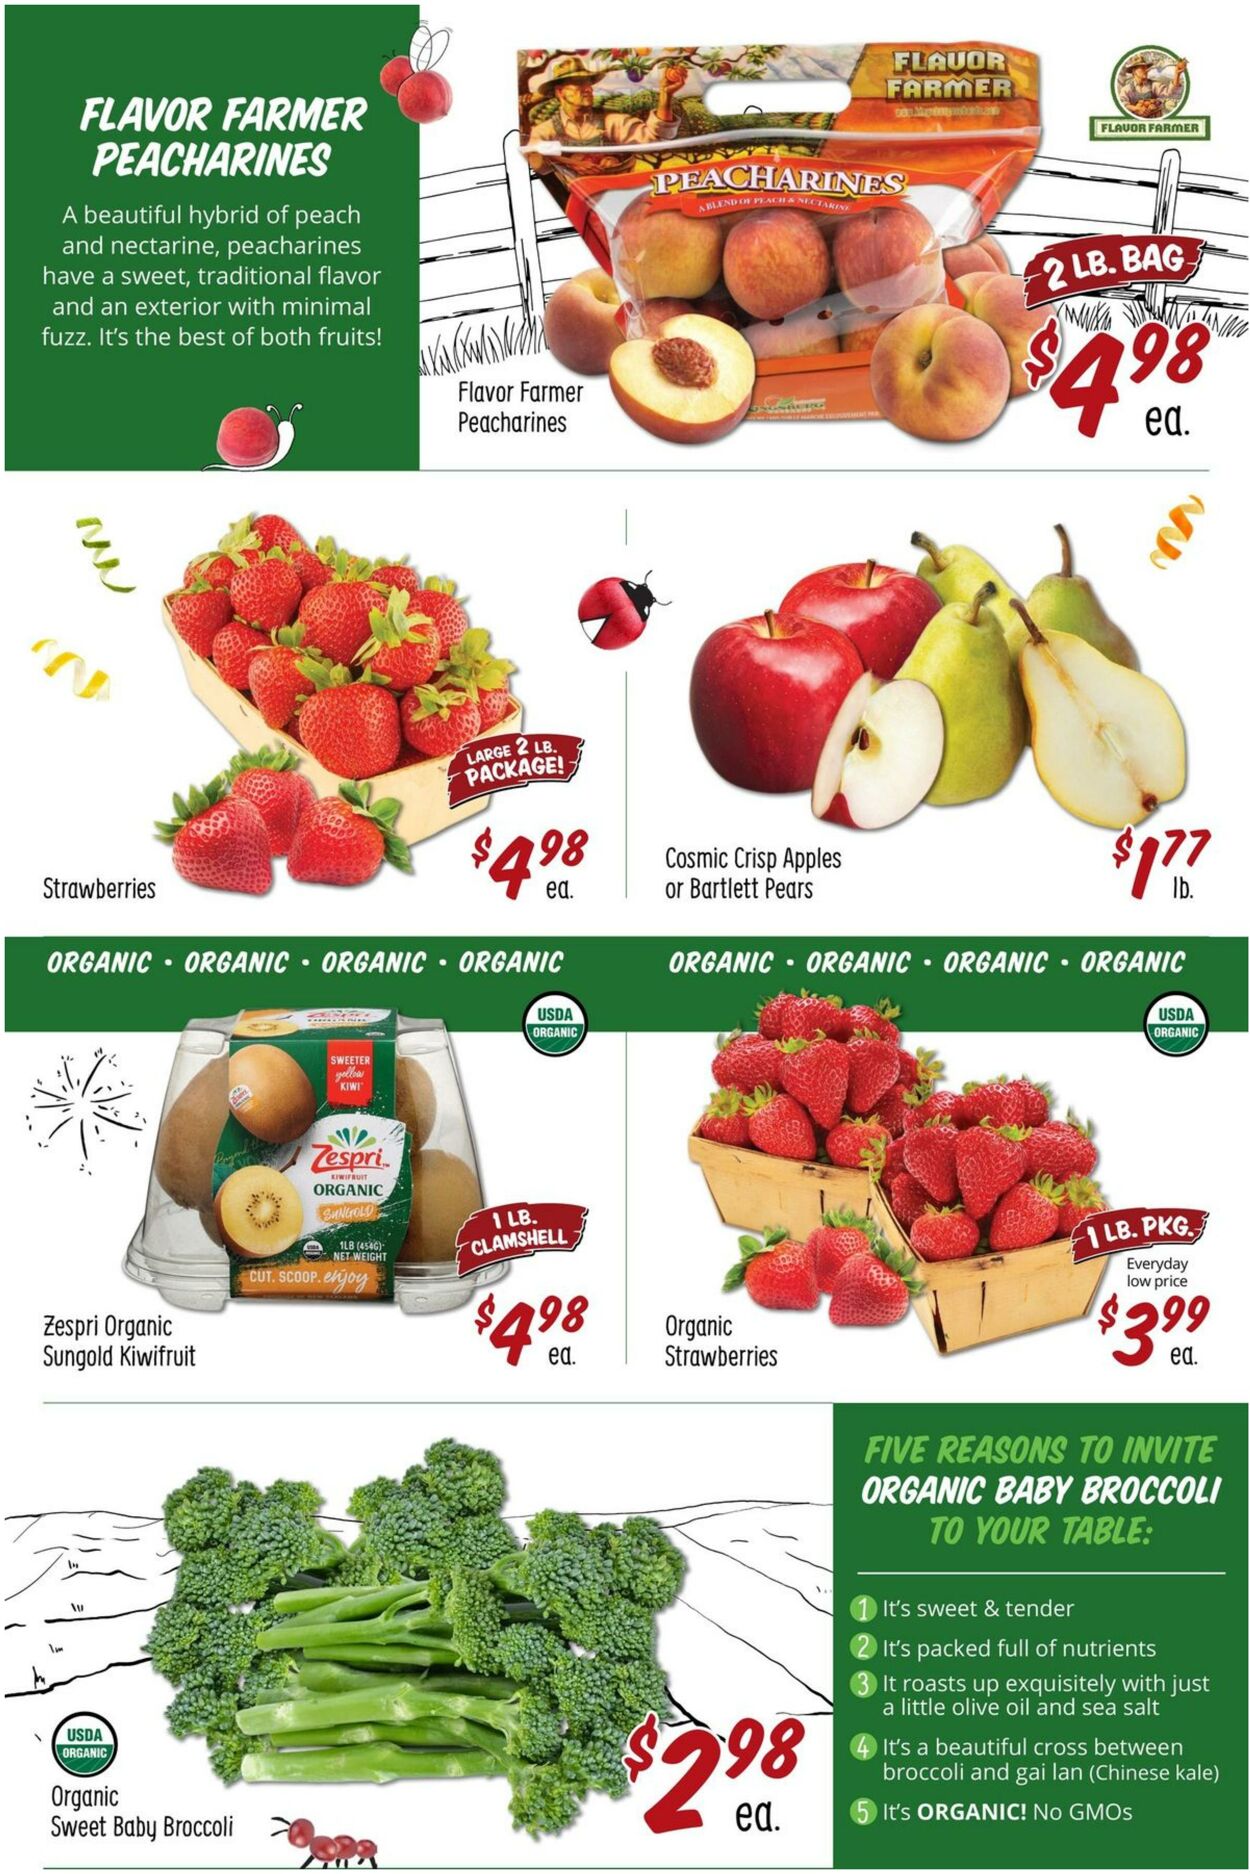 Weekly ad Sprouts 06/29/2022 - 07/05/2022